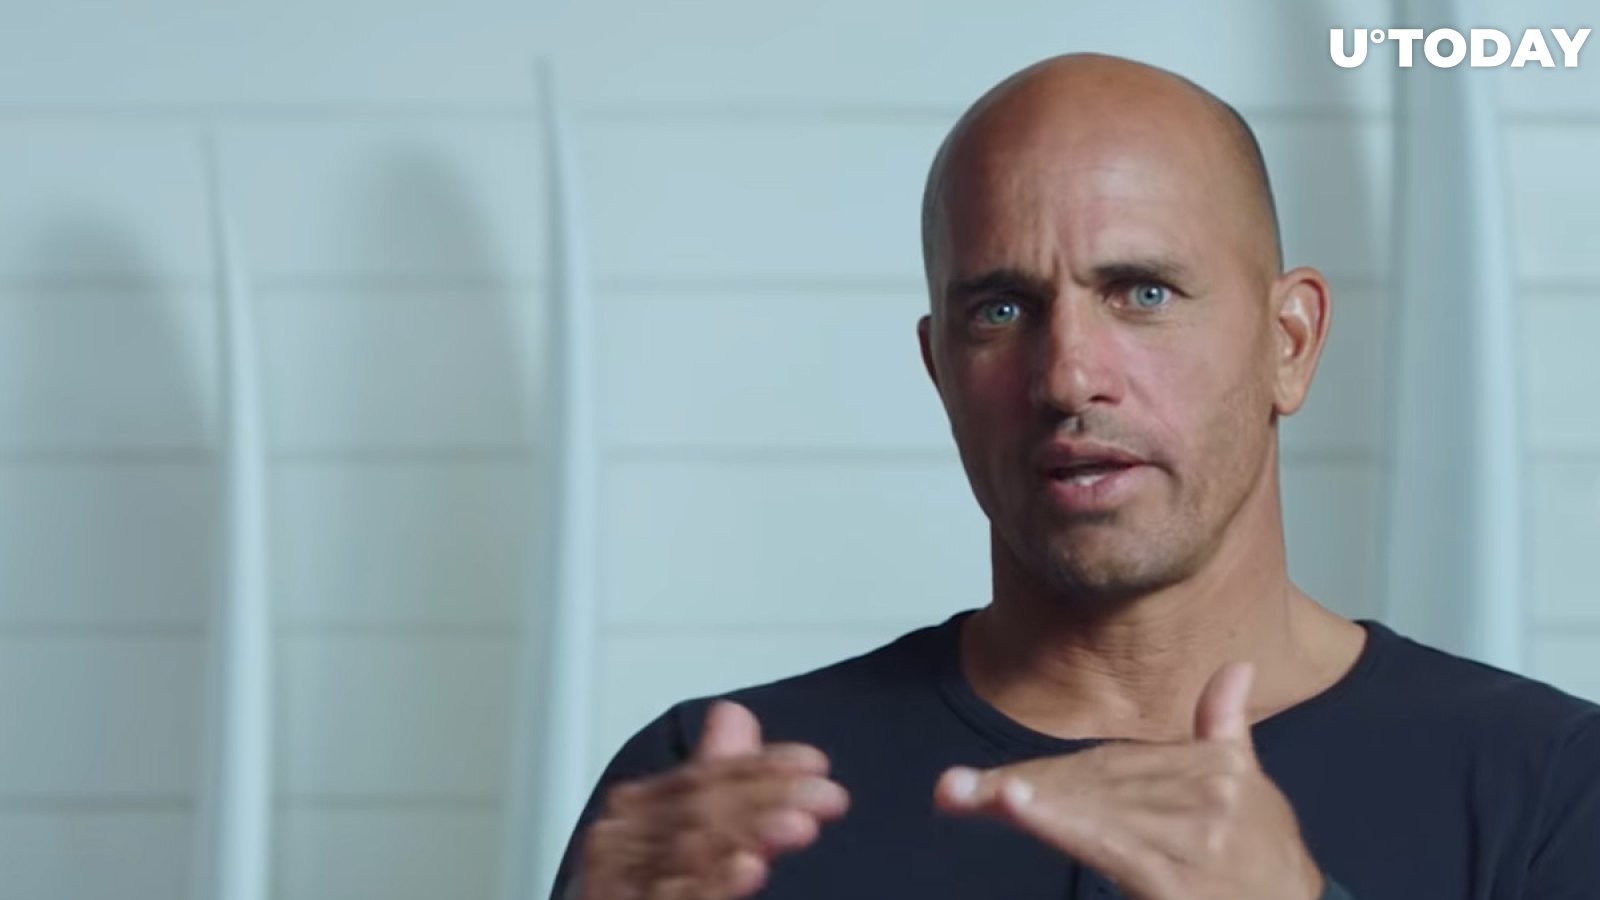 After Claiming That Elon Musk Is Bad for Crypto, Legendary Surfer Kelly Slater Shares Plan to Launch His Own Coin